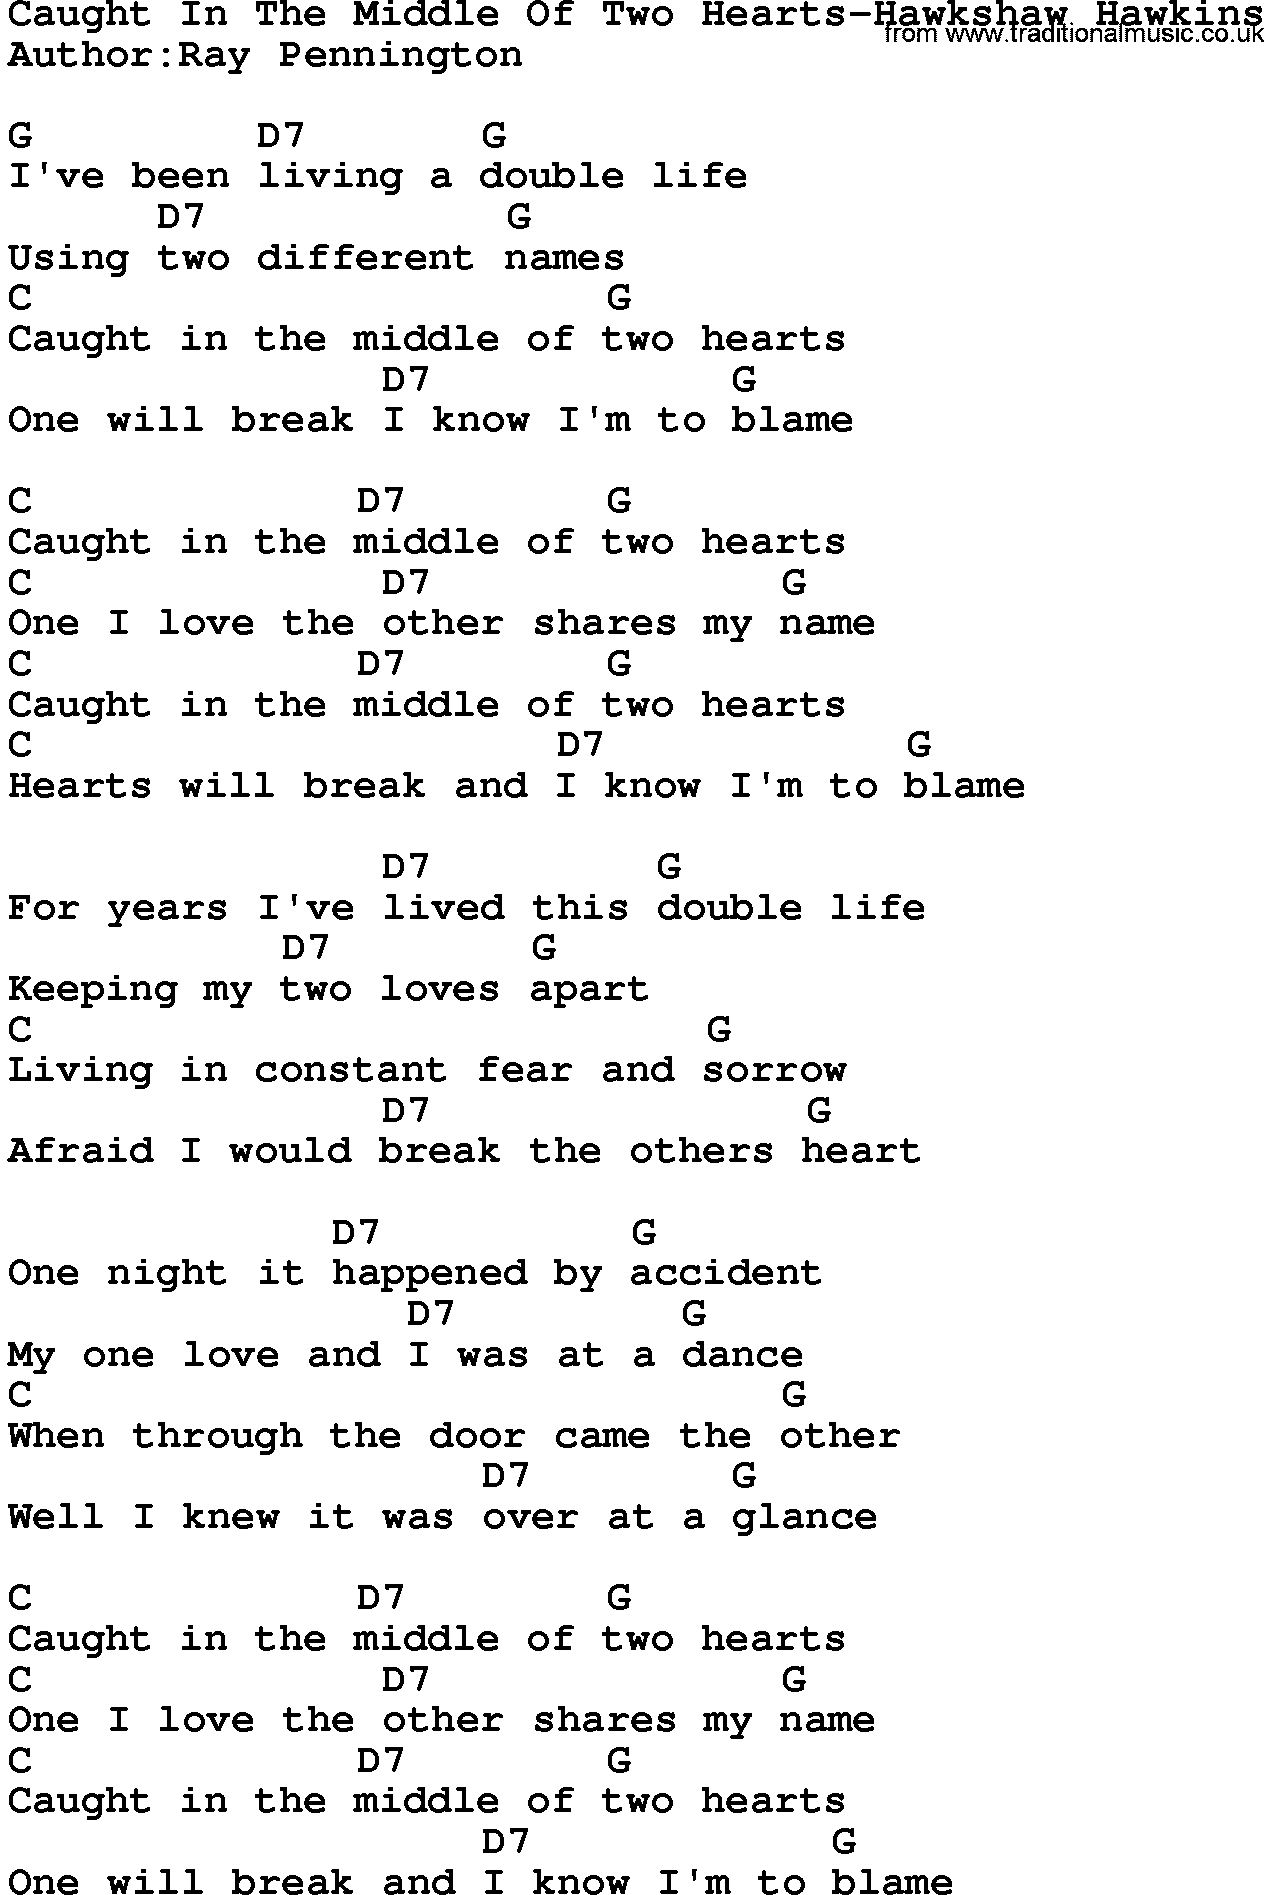 Country music song: Caught In The Middle Of Two Hearts-Hawkshaw Hawkins lyrics and chords